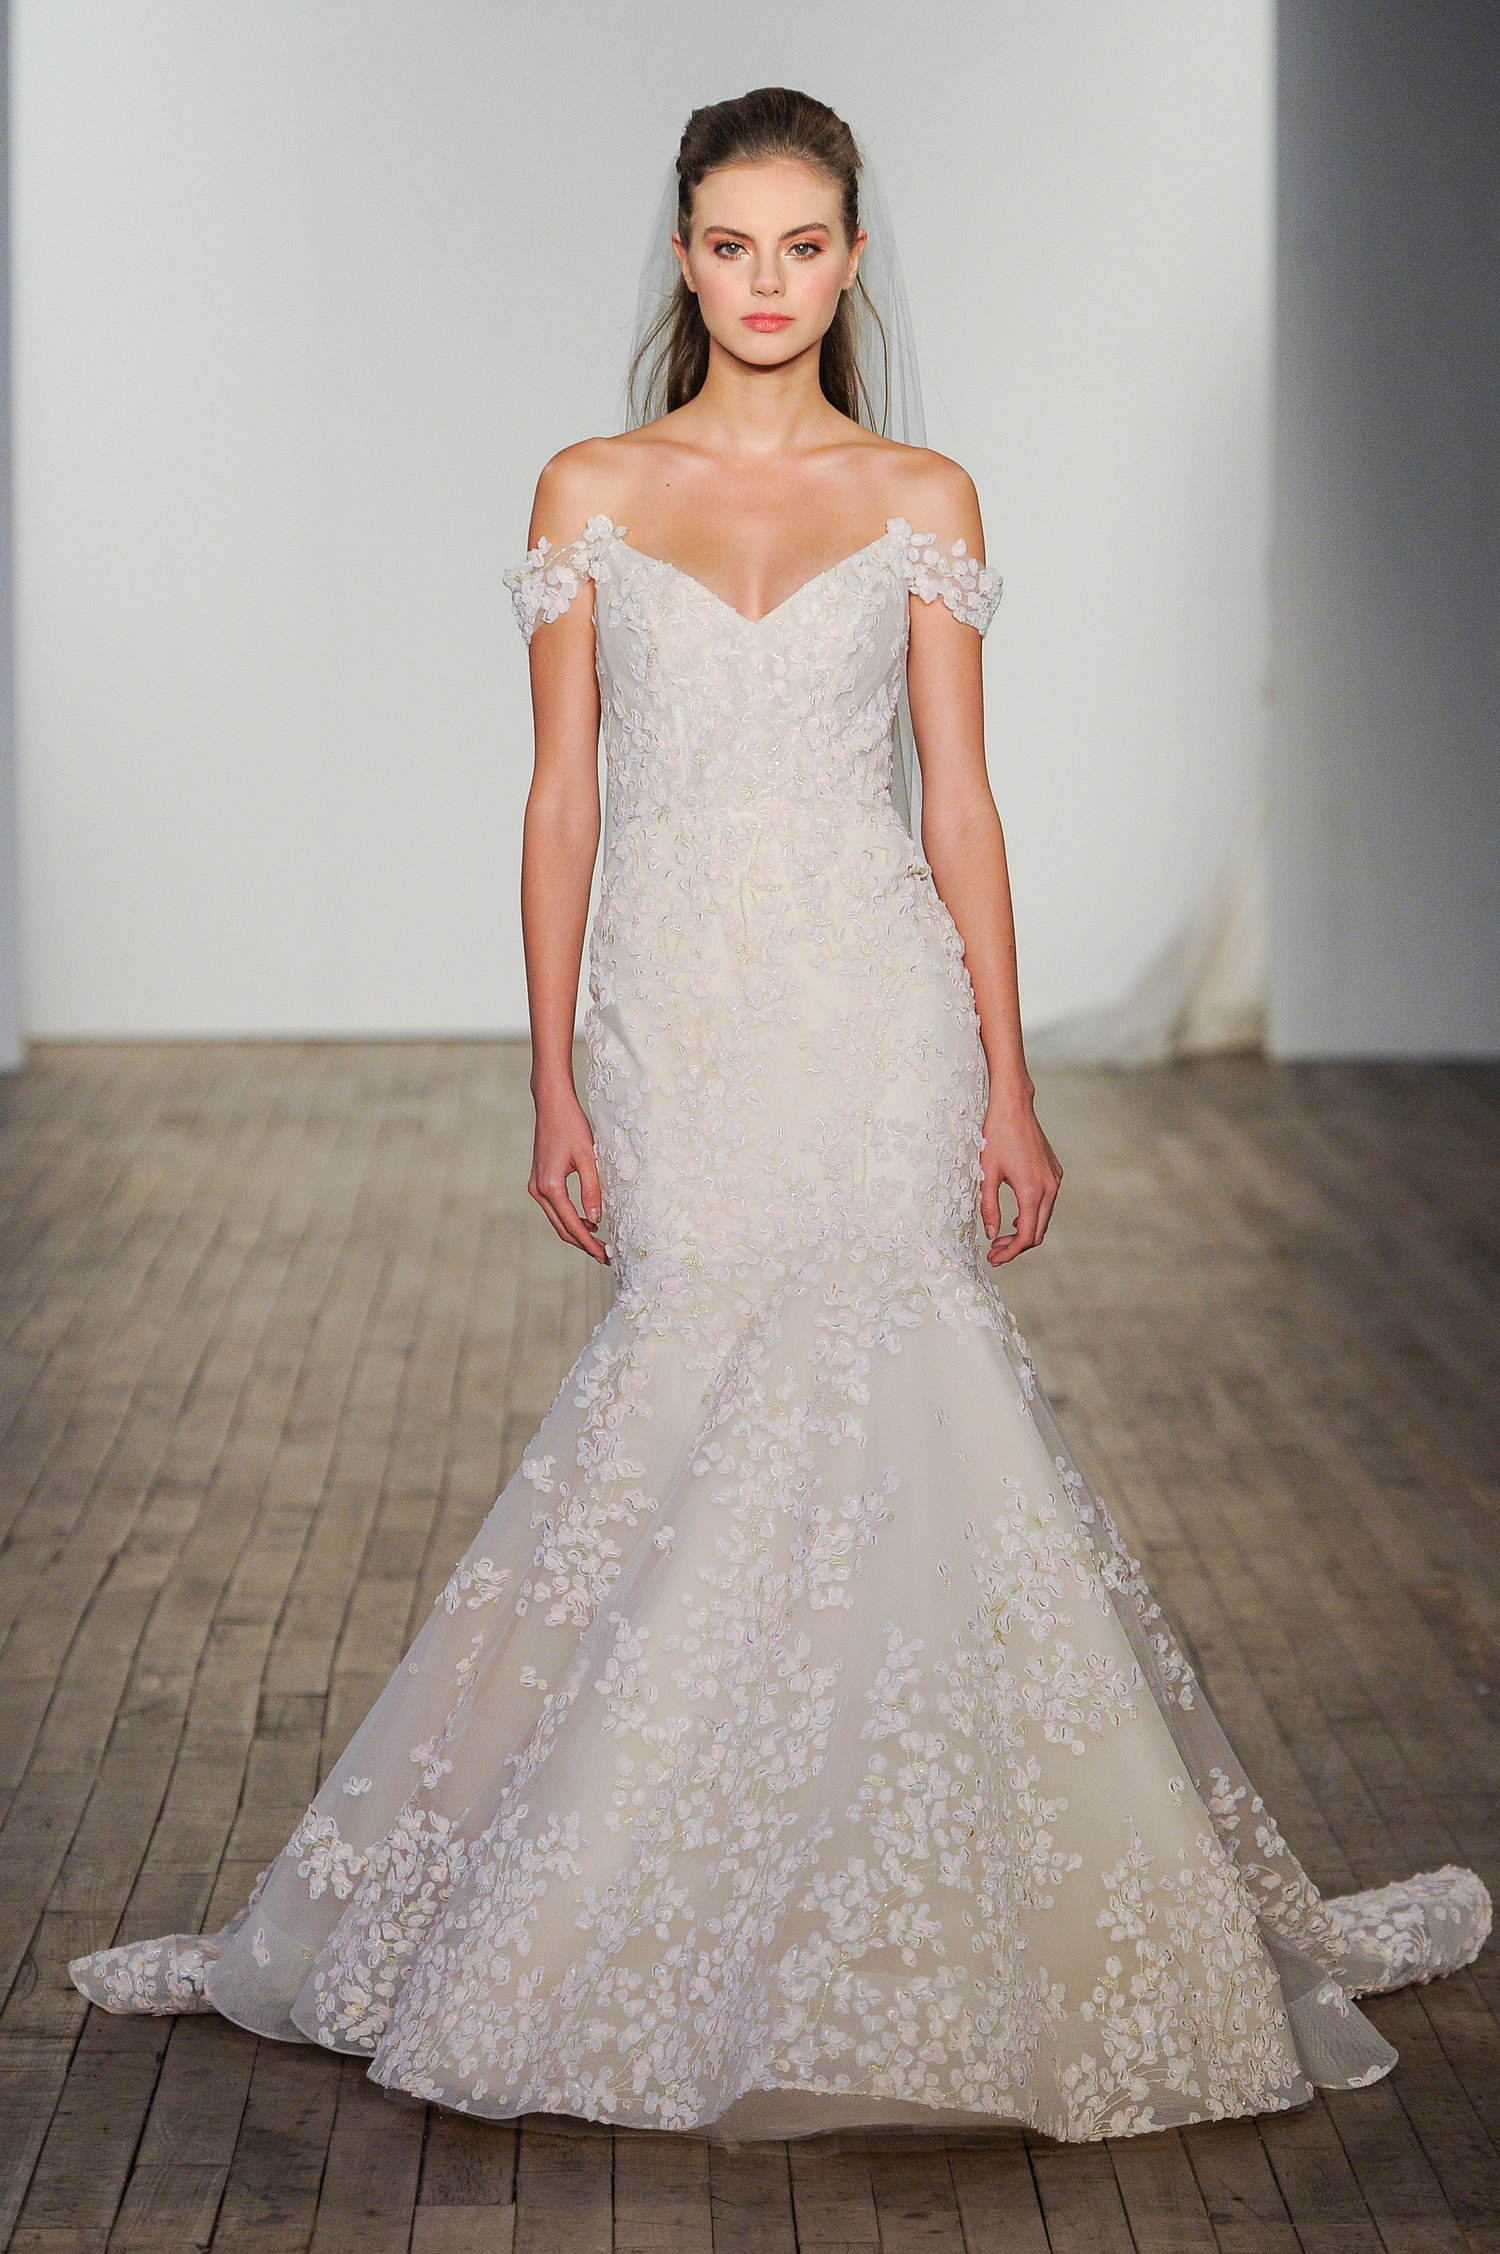 New Bridal Styles - Couture Fall 2020 Wedding Dresses